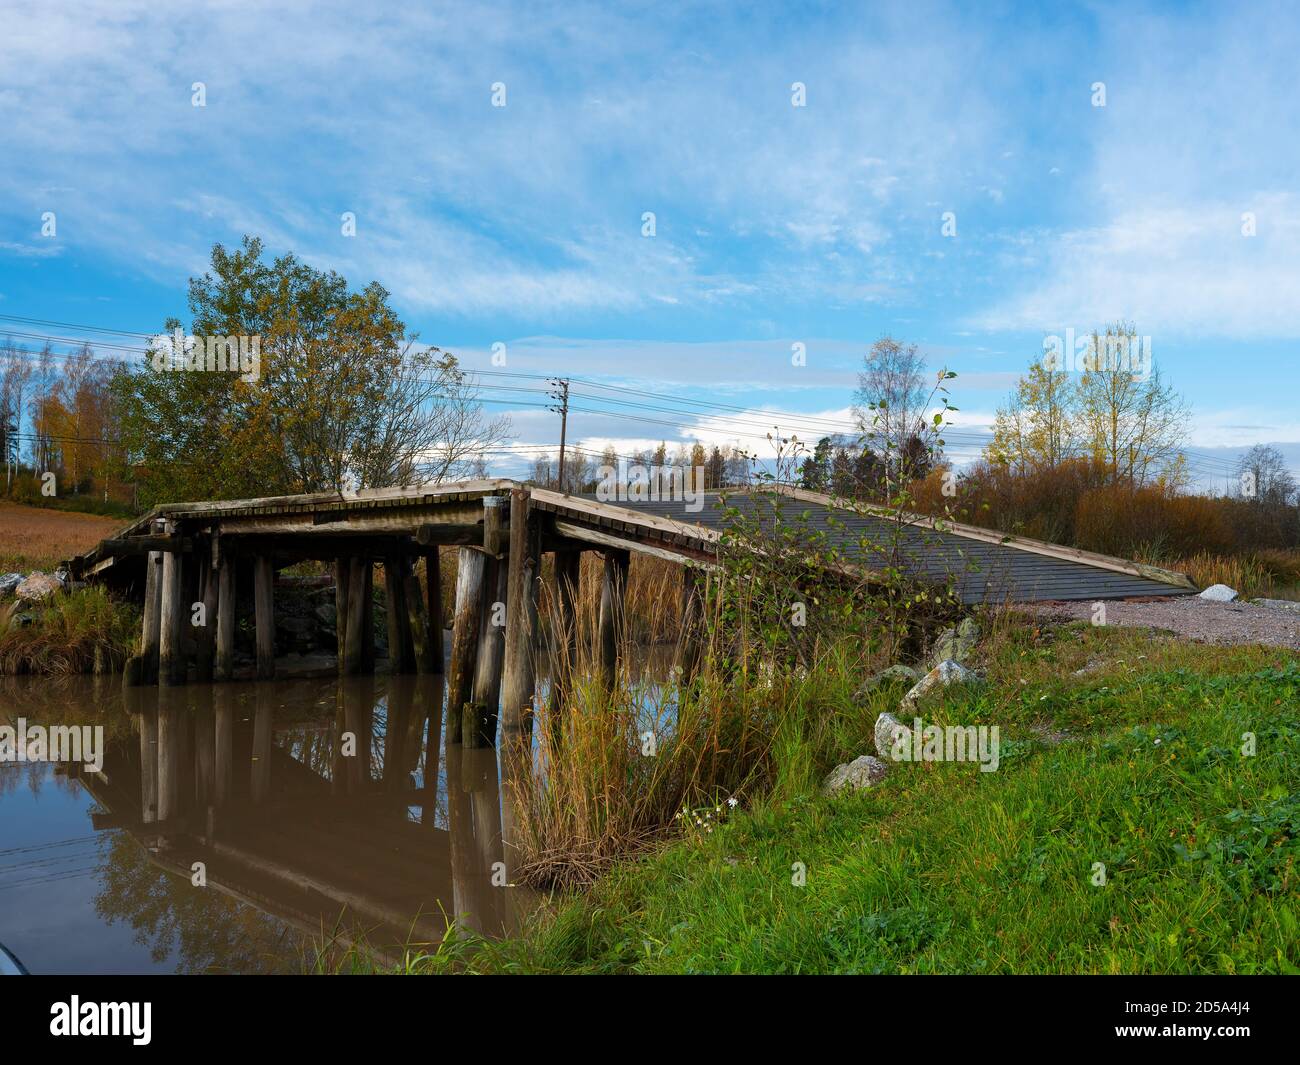 Sipoo/Finland - OCTOBER 12, 2020: A beautiful rural scene with an old wooden bridge casting reflections on the calm river surface. Stock Photo